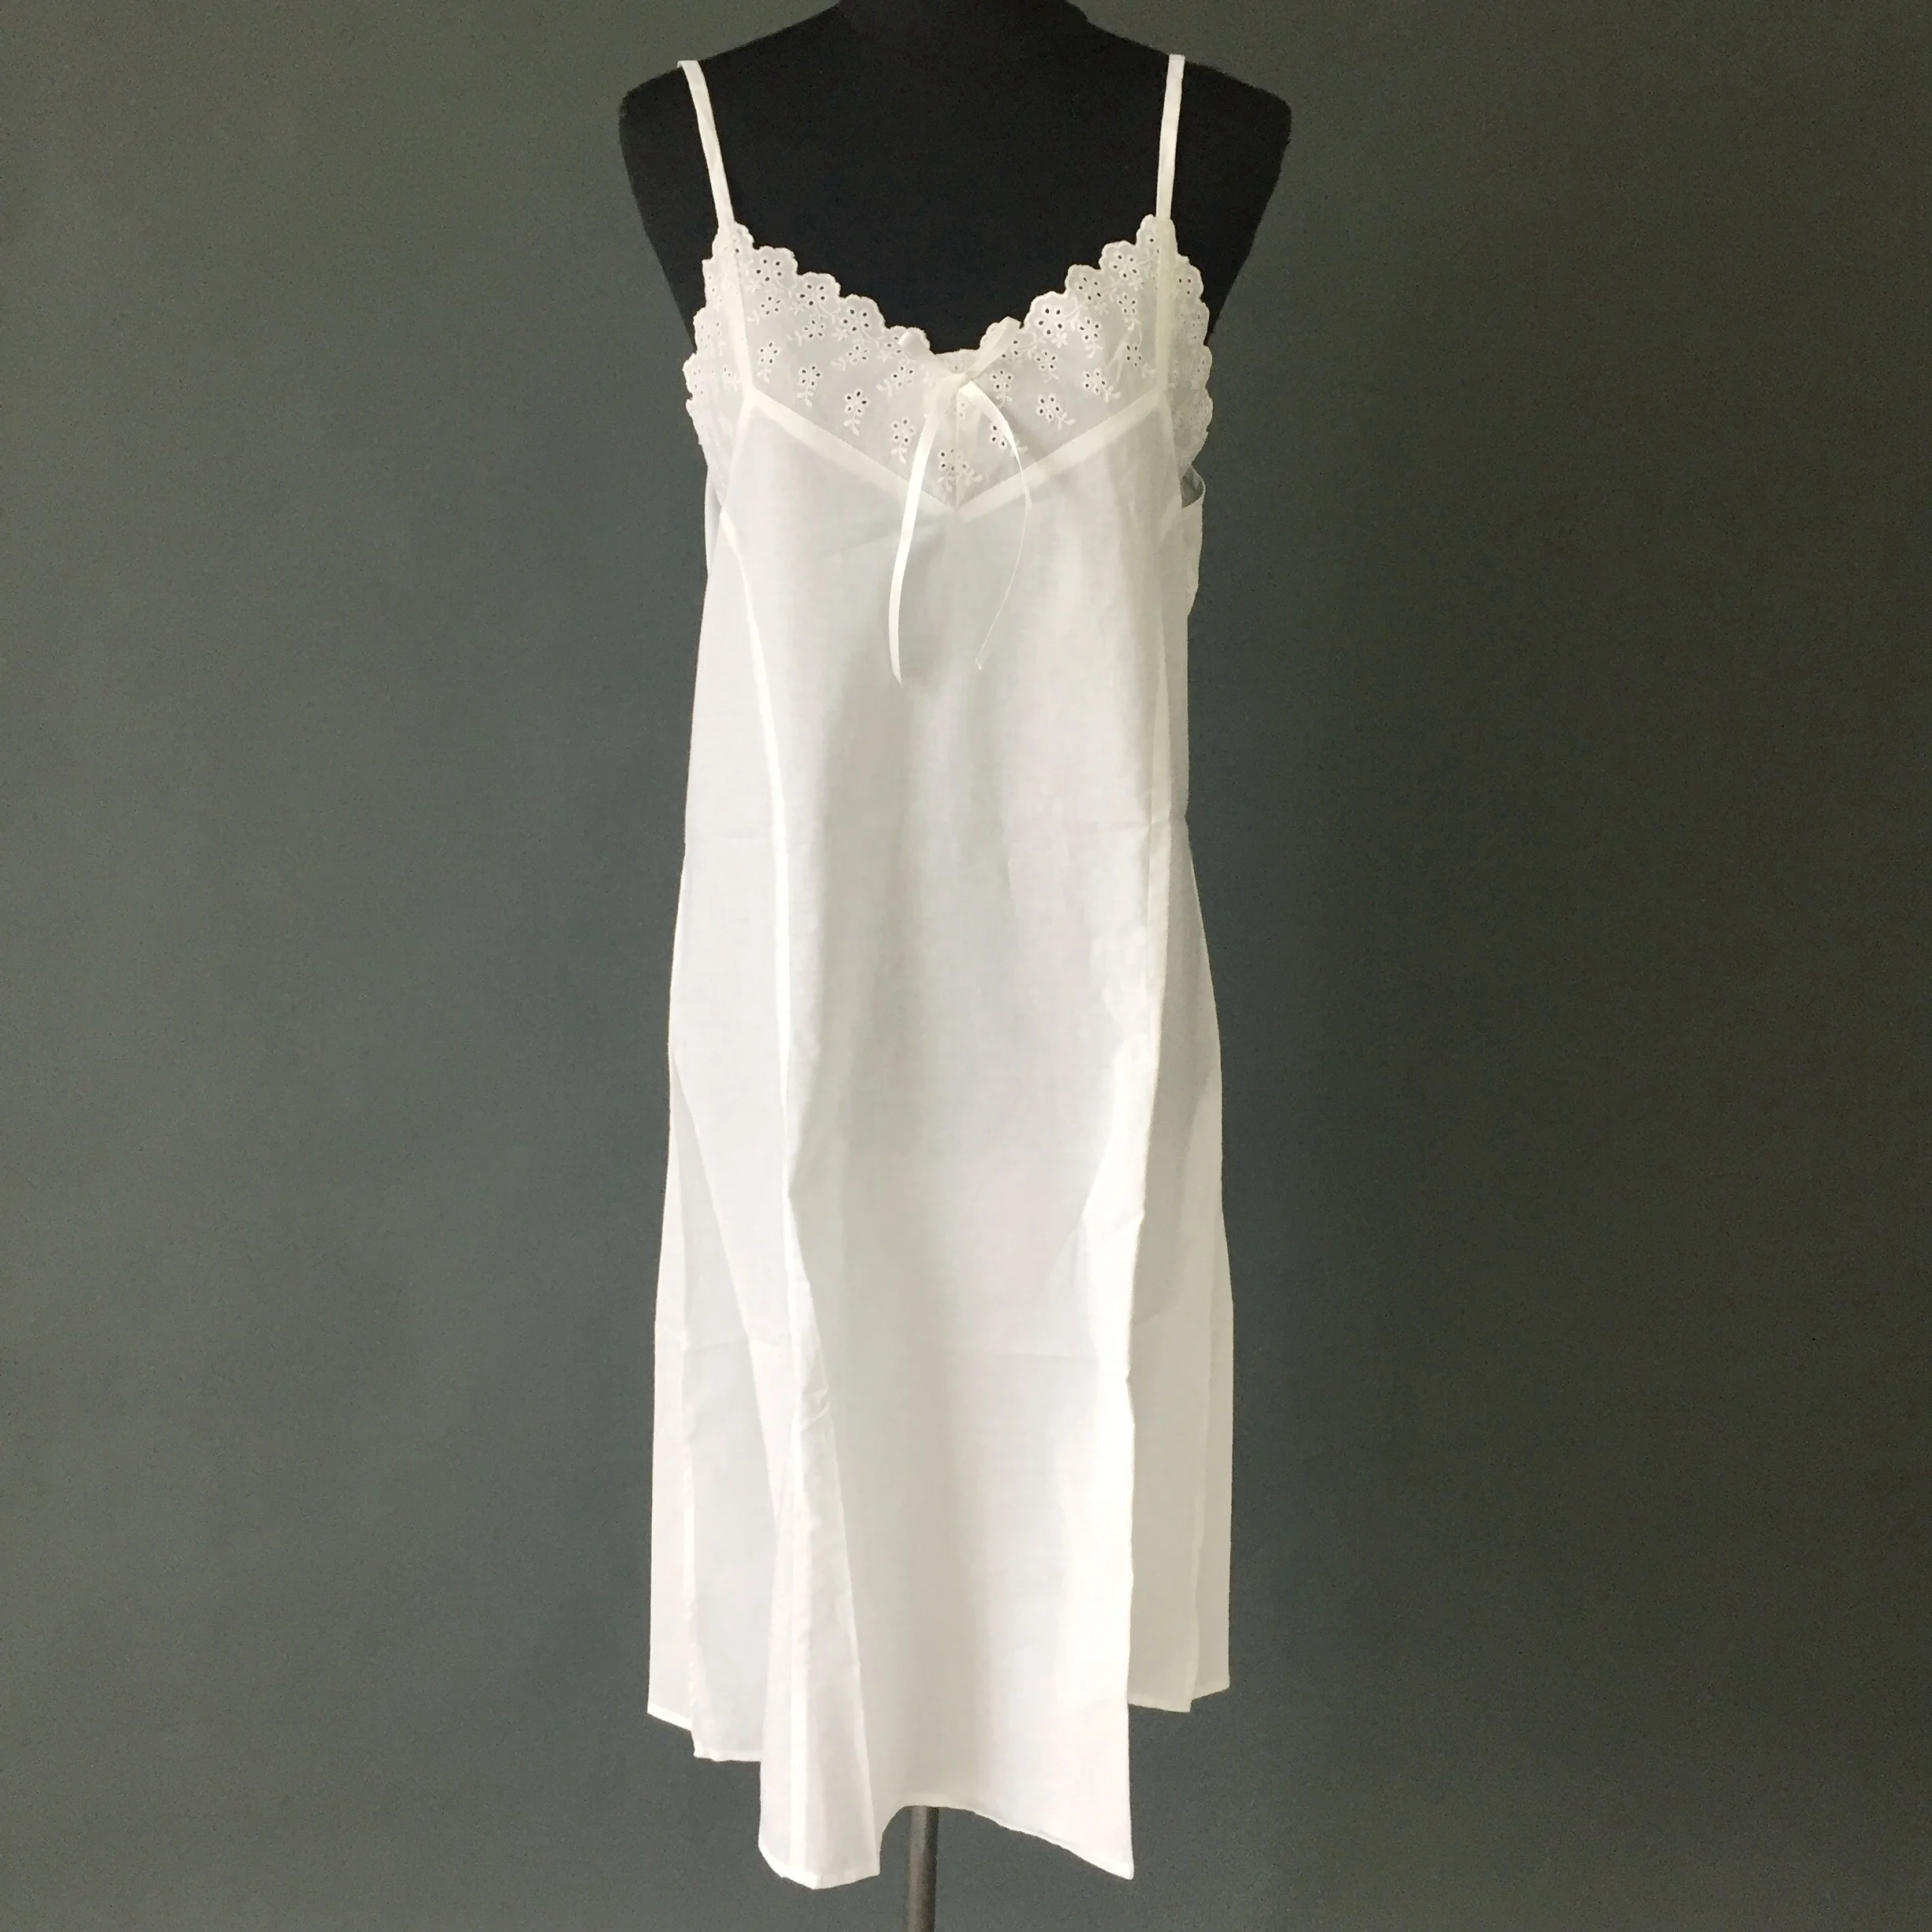 Golden Supplier White Cotton Dressing Gown Nightgown - Buy Dressing ...